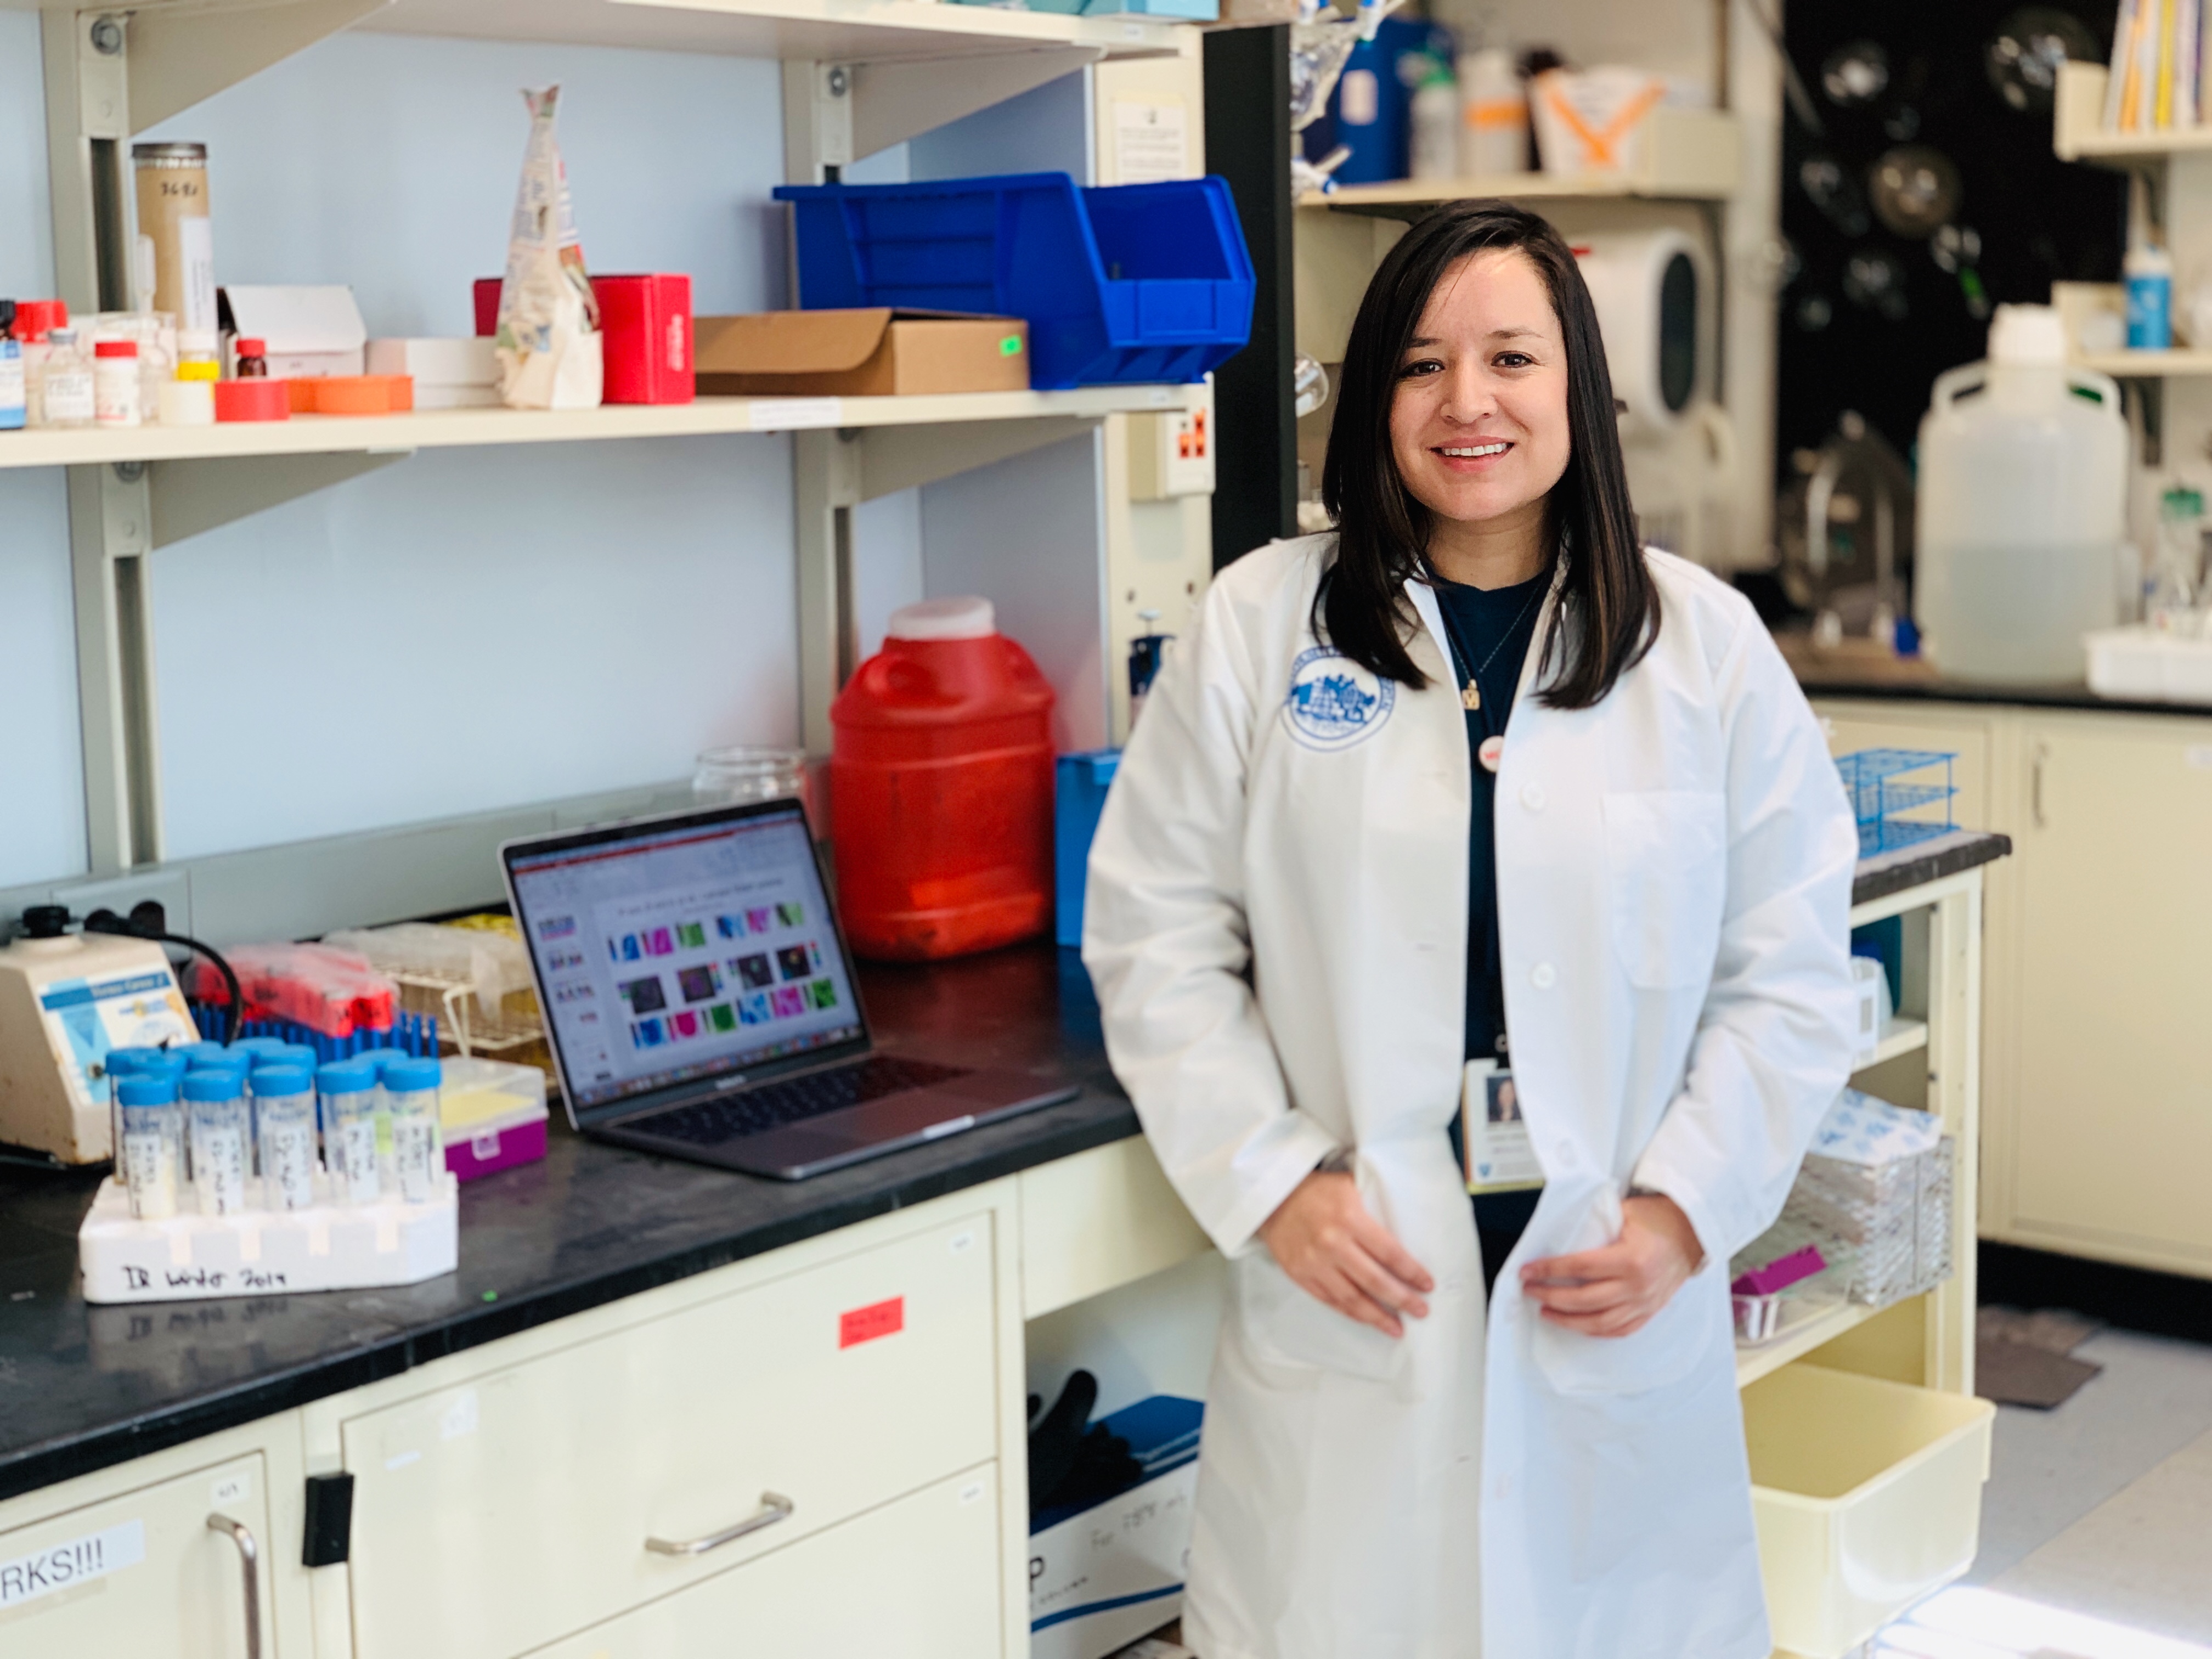 All in a Day’s Work: Veronica Clavijo Jordan on tackling cancer and crowdfunding molecular imaging research